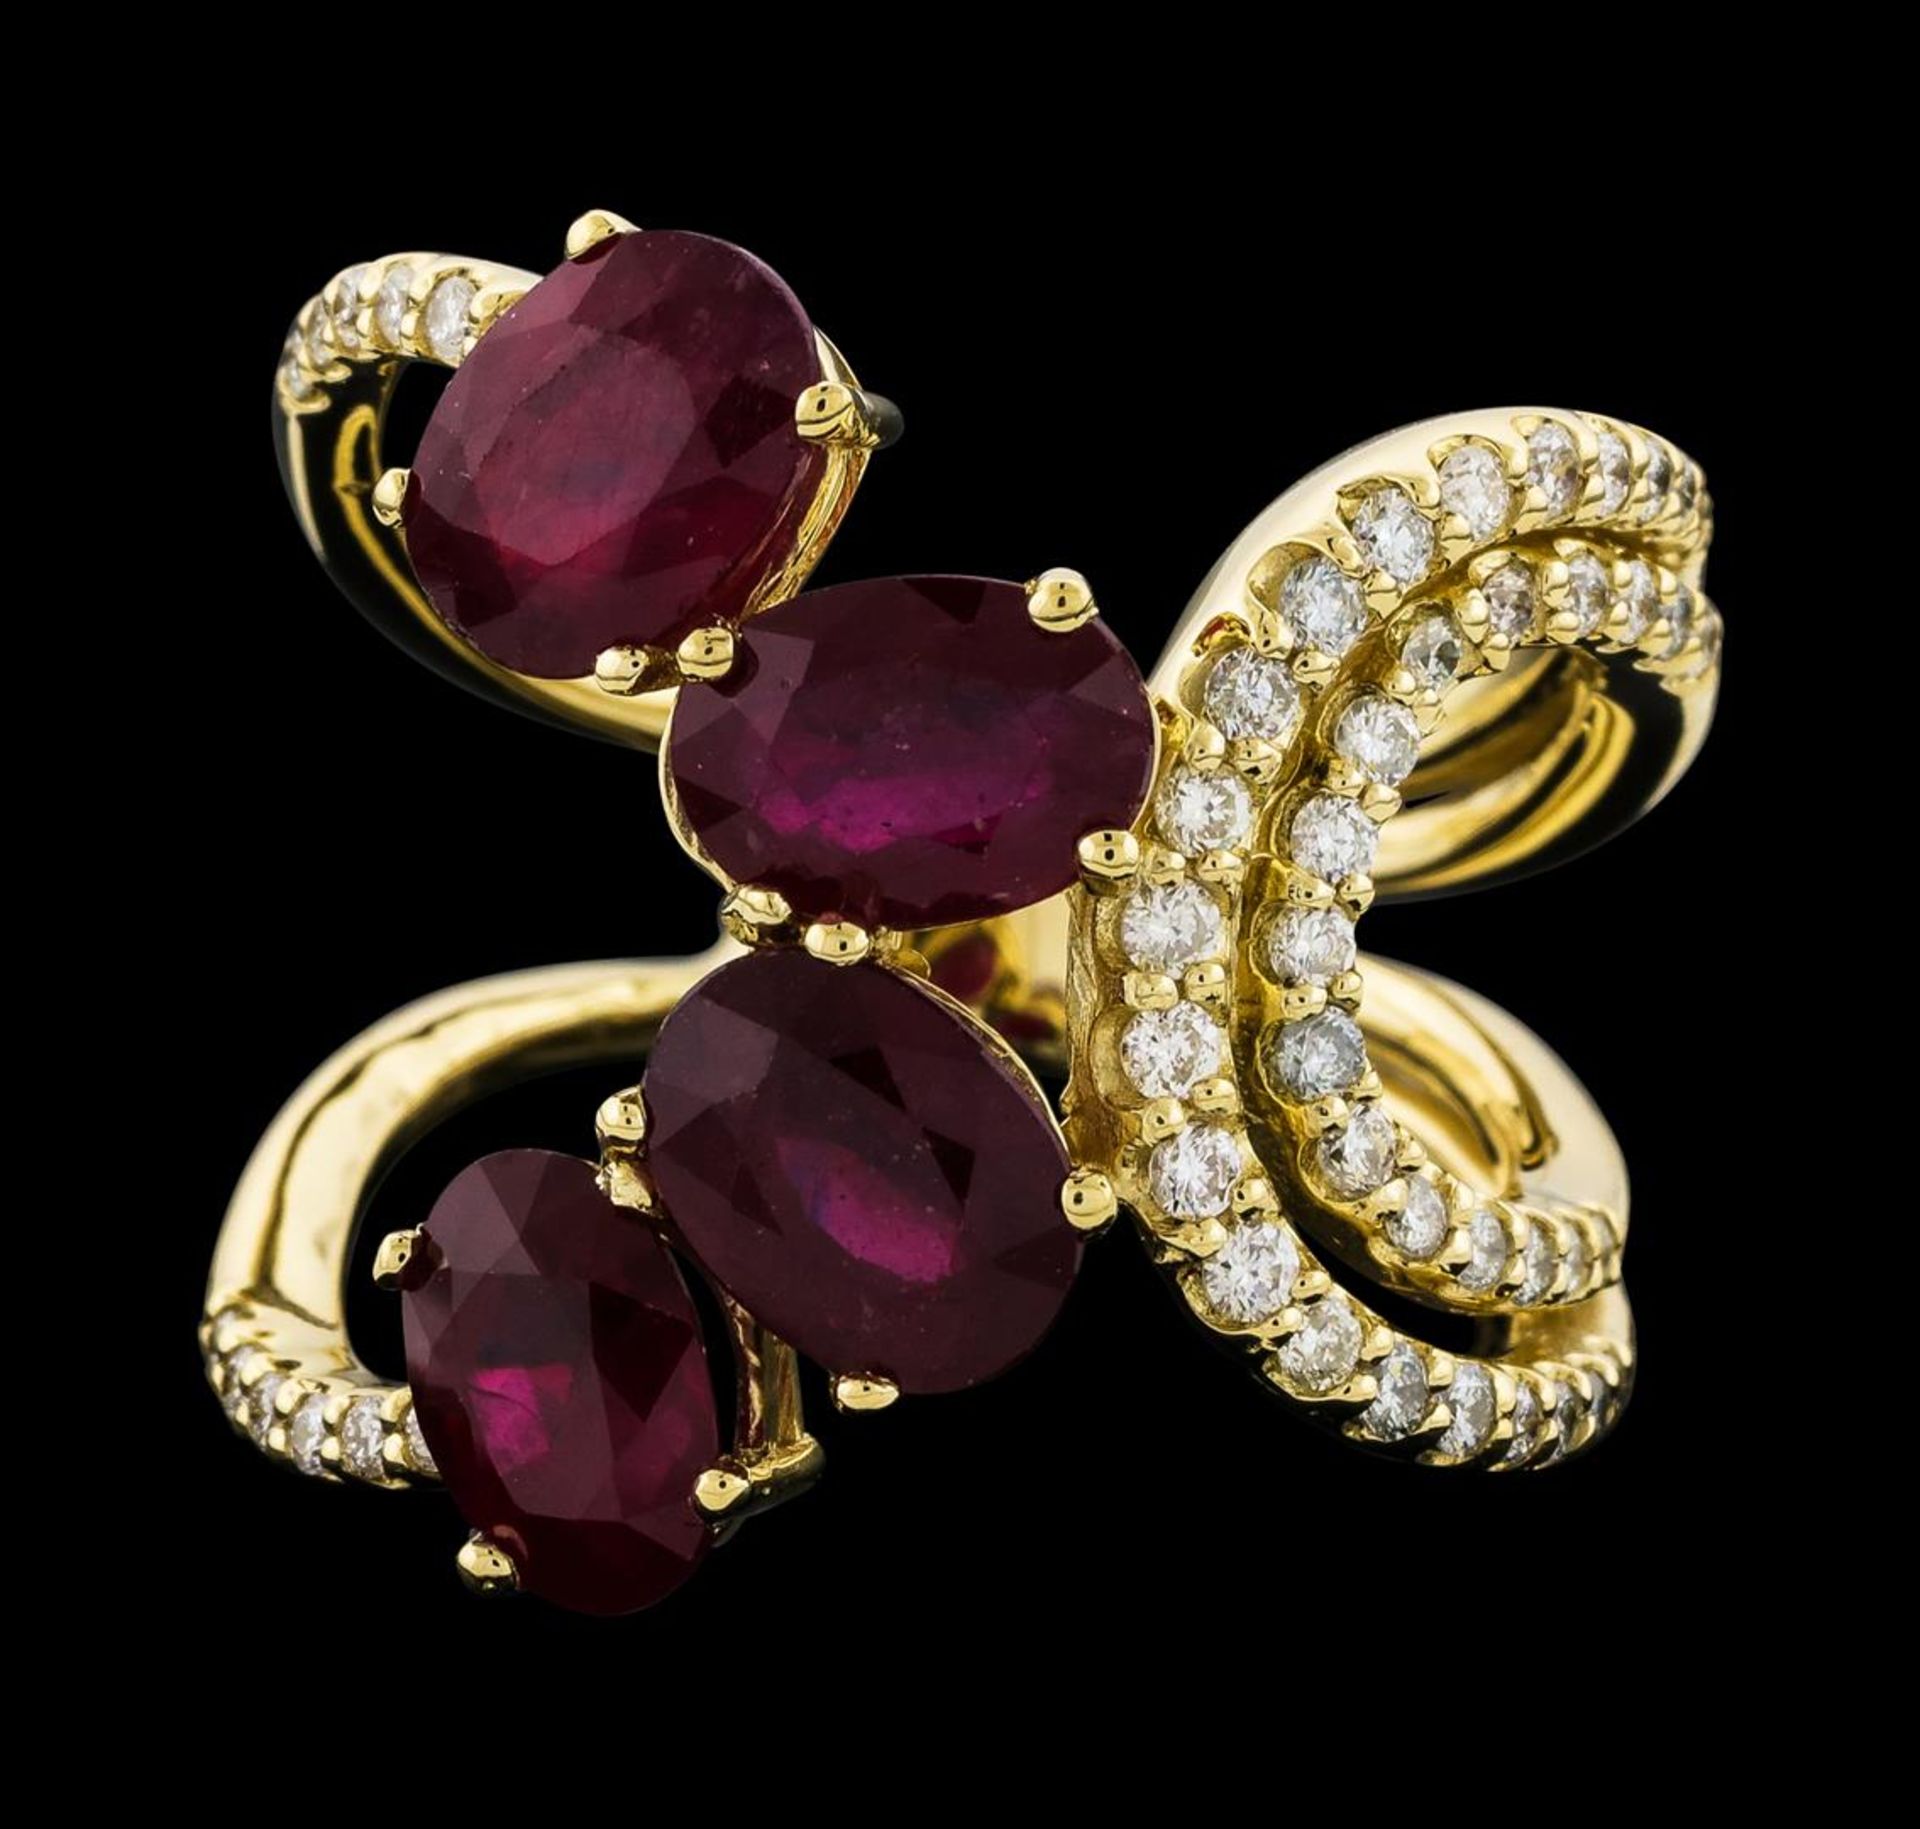 4.73 ctw Ruby and Diamond Ring - 14KT Yellow Gold - Image 2 of 4